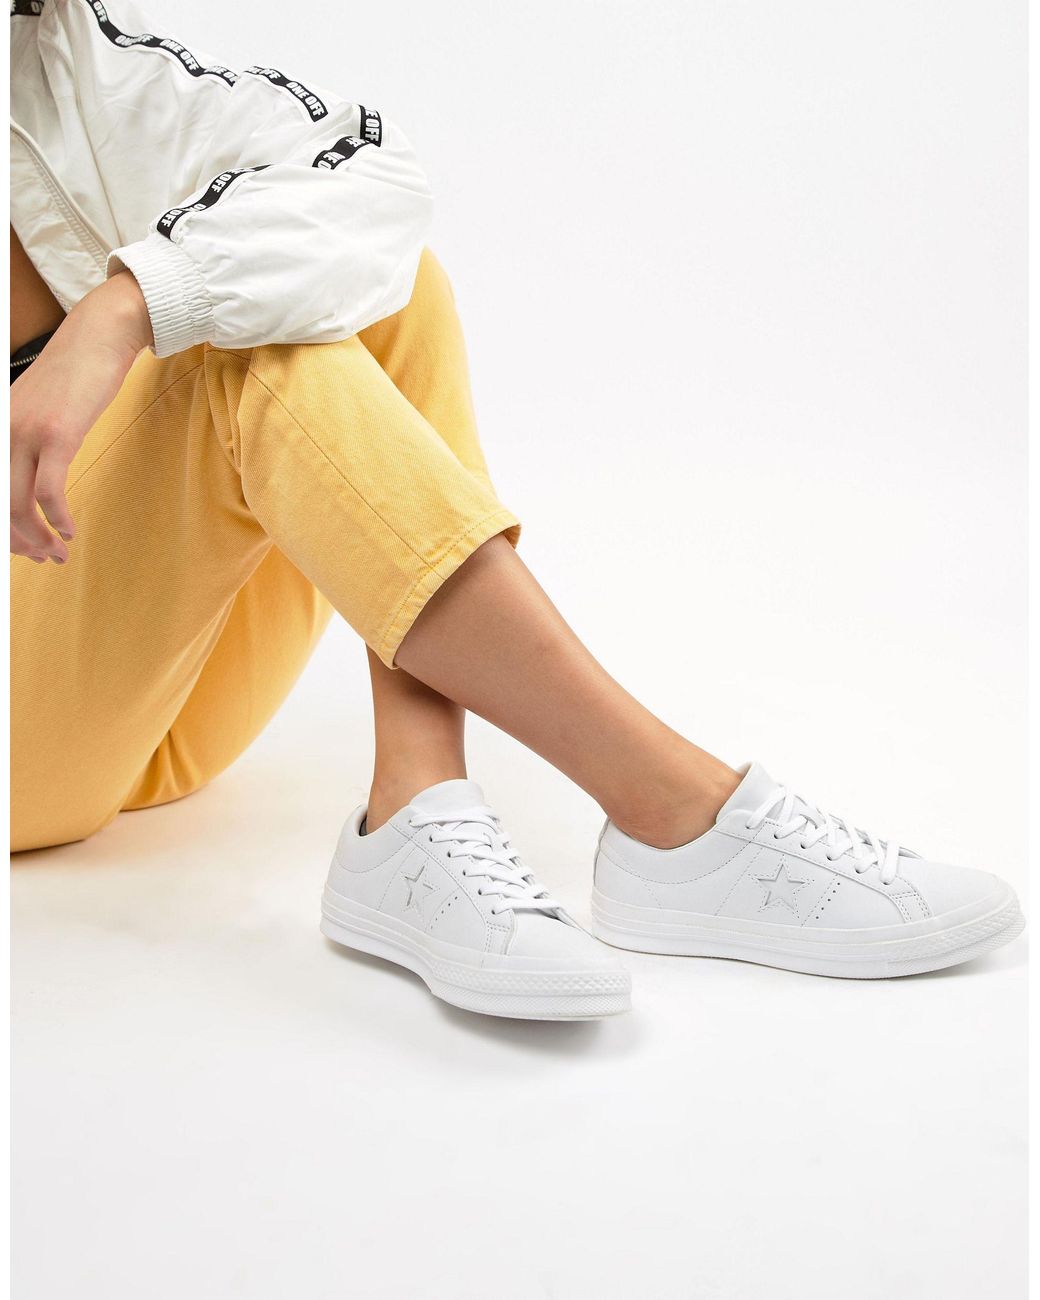 Converse One Star Triple Leather Sneakers in White | Lyst Canada